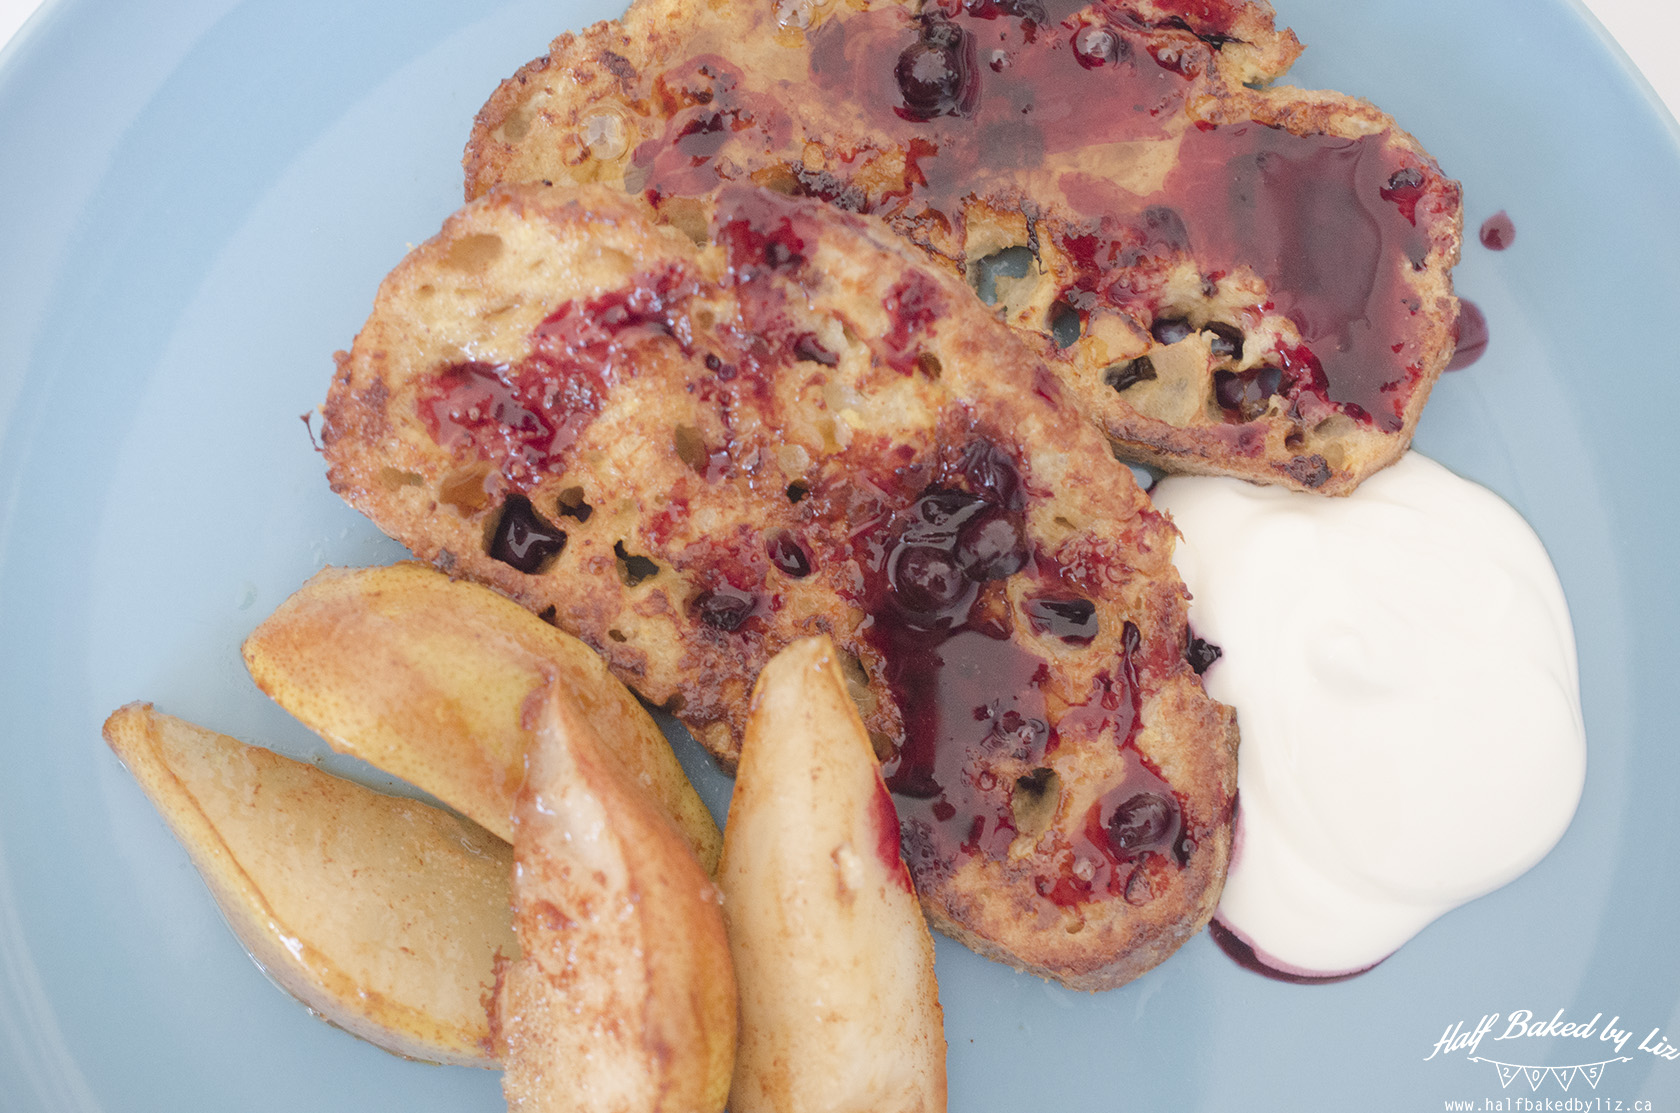 Final - French Toast + Fried Pears